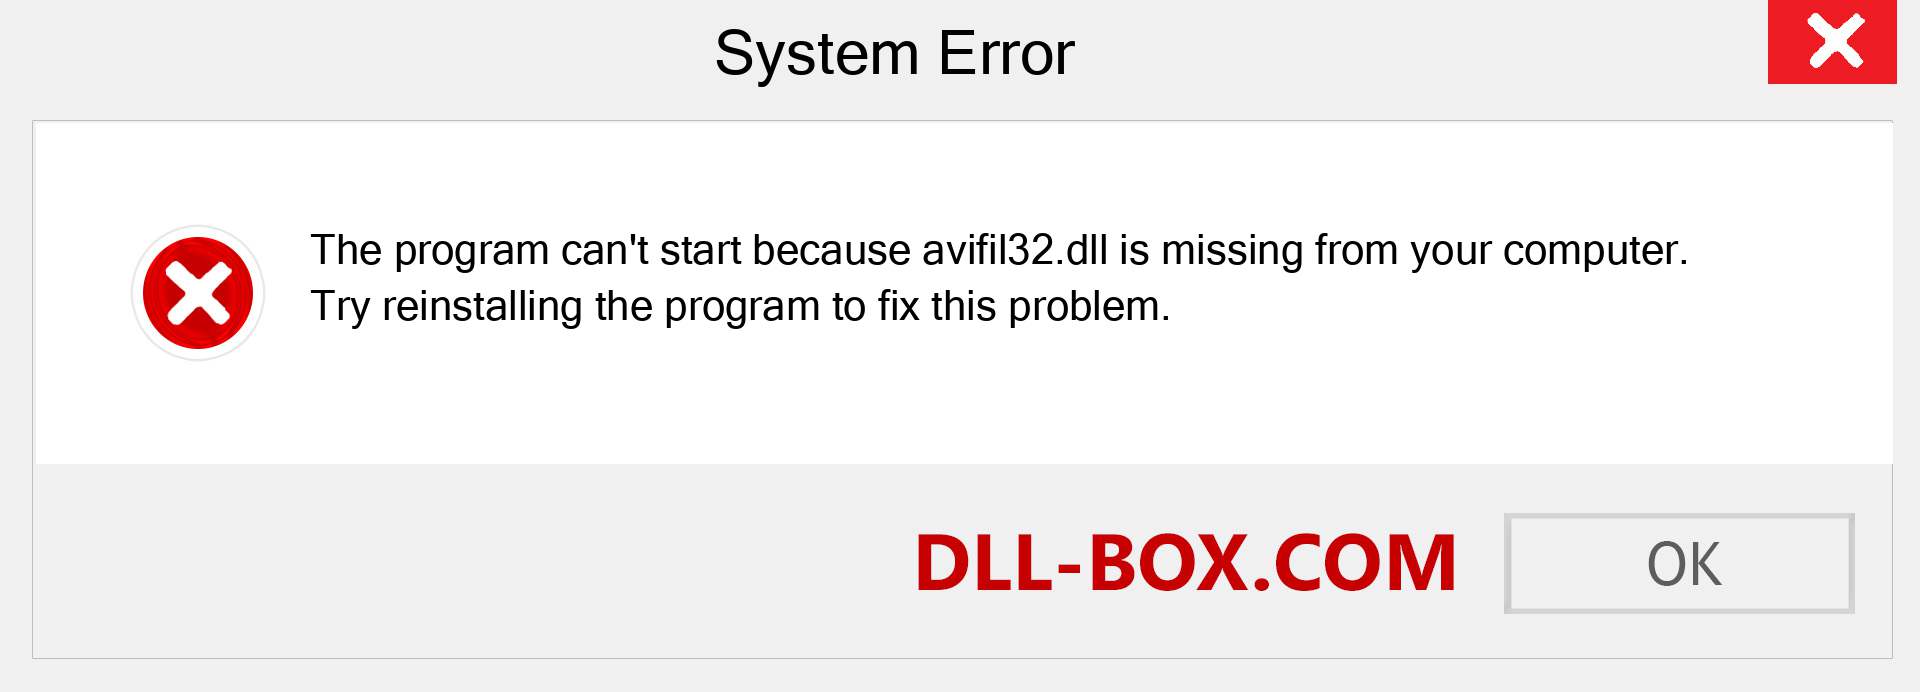  avifil32.dll file is missing?. Download for Windows 7, 8, 10 - Fix  avifil32 dll Missing Error on Windows, photos, images